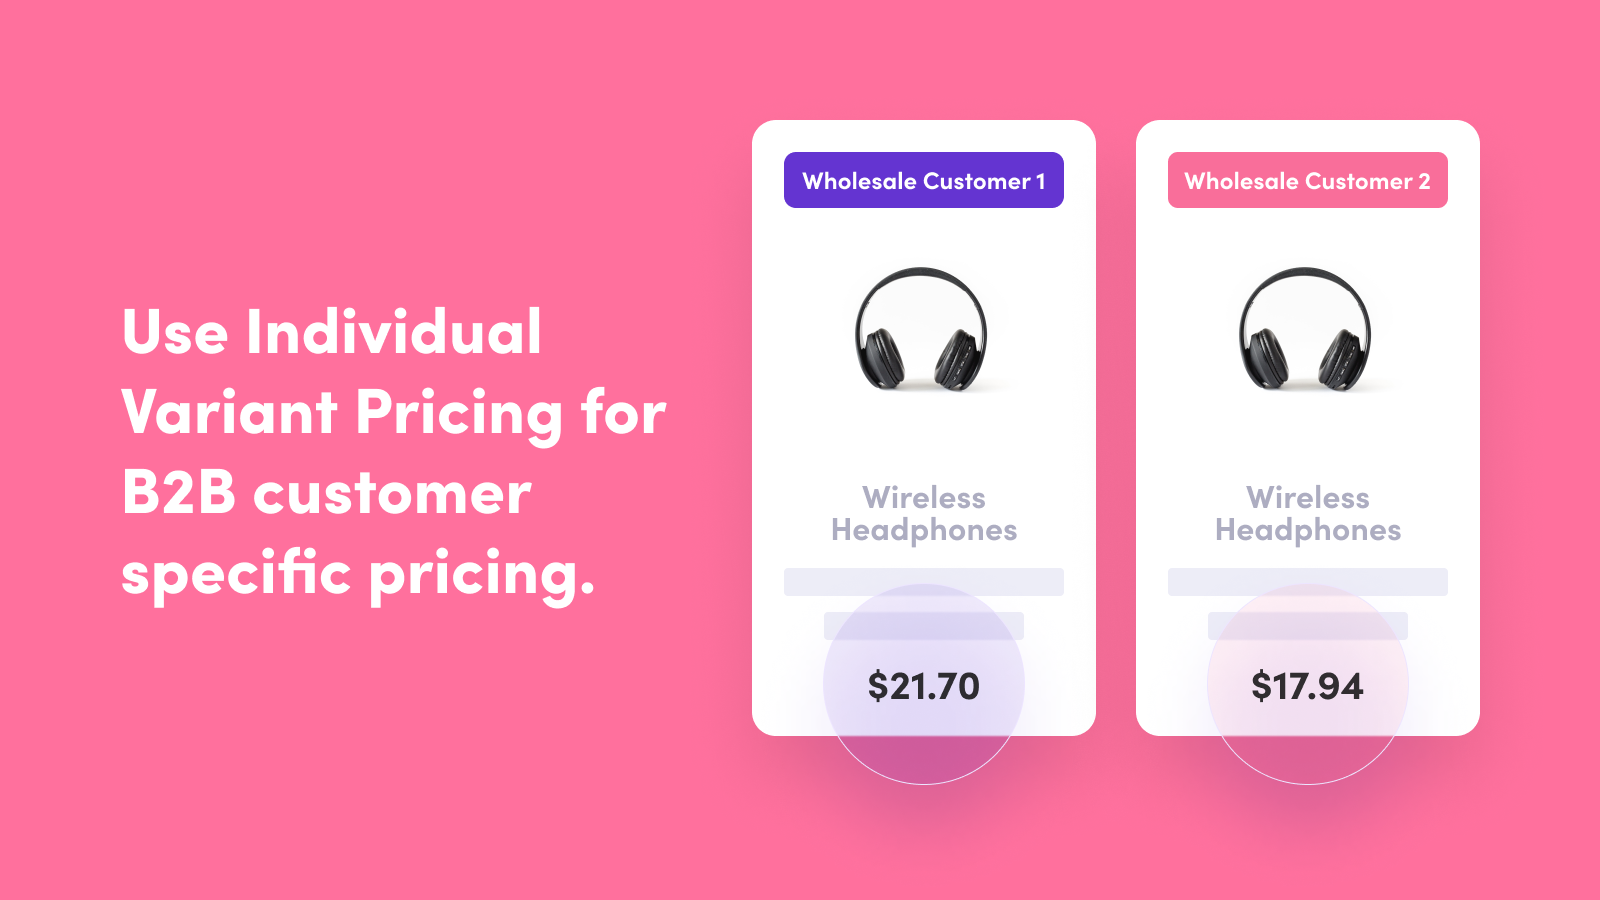 Use Individual Variant Pricing for B2B customer specific pricing